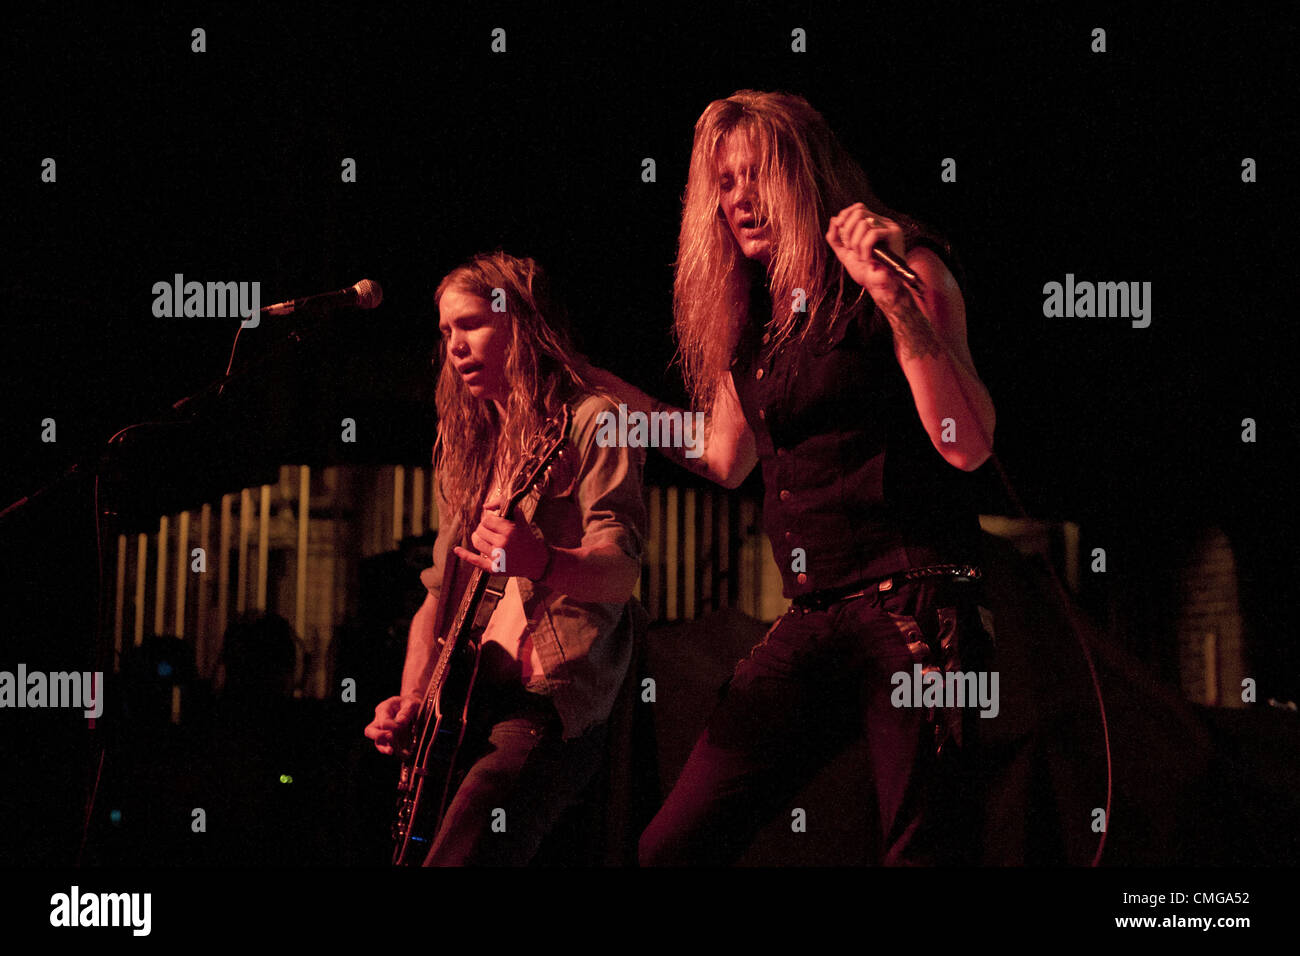 July 27, 2012 - Guitar prodigy Nick Sterling (left) performs with solo  recording artist, former frontman of the 1980's heavy metal group Skid Row,  and VH1 TV personality Sebastian Bach (right) live